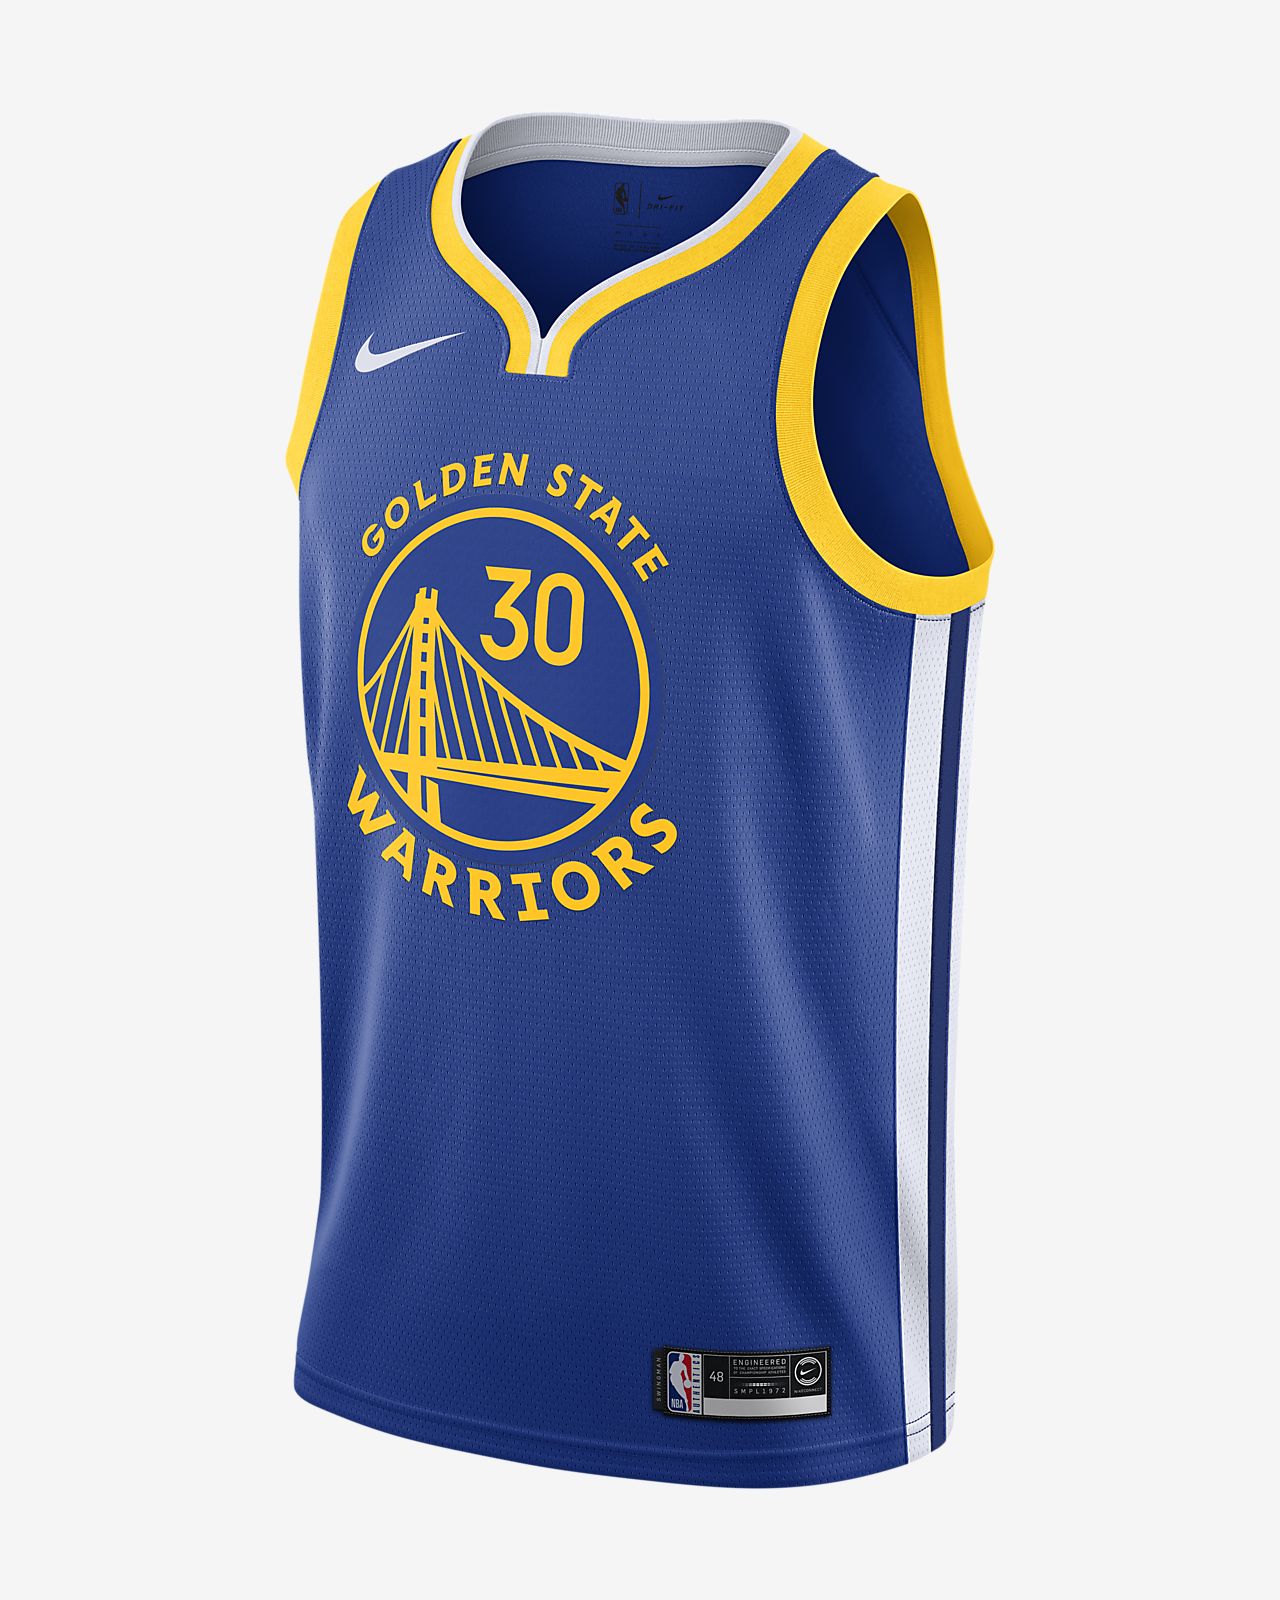 curry jersey, OFF 79%,Free delivery!